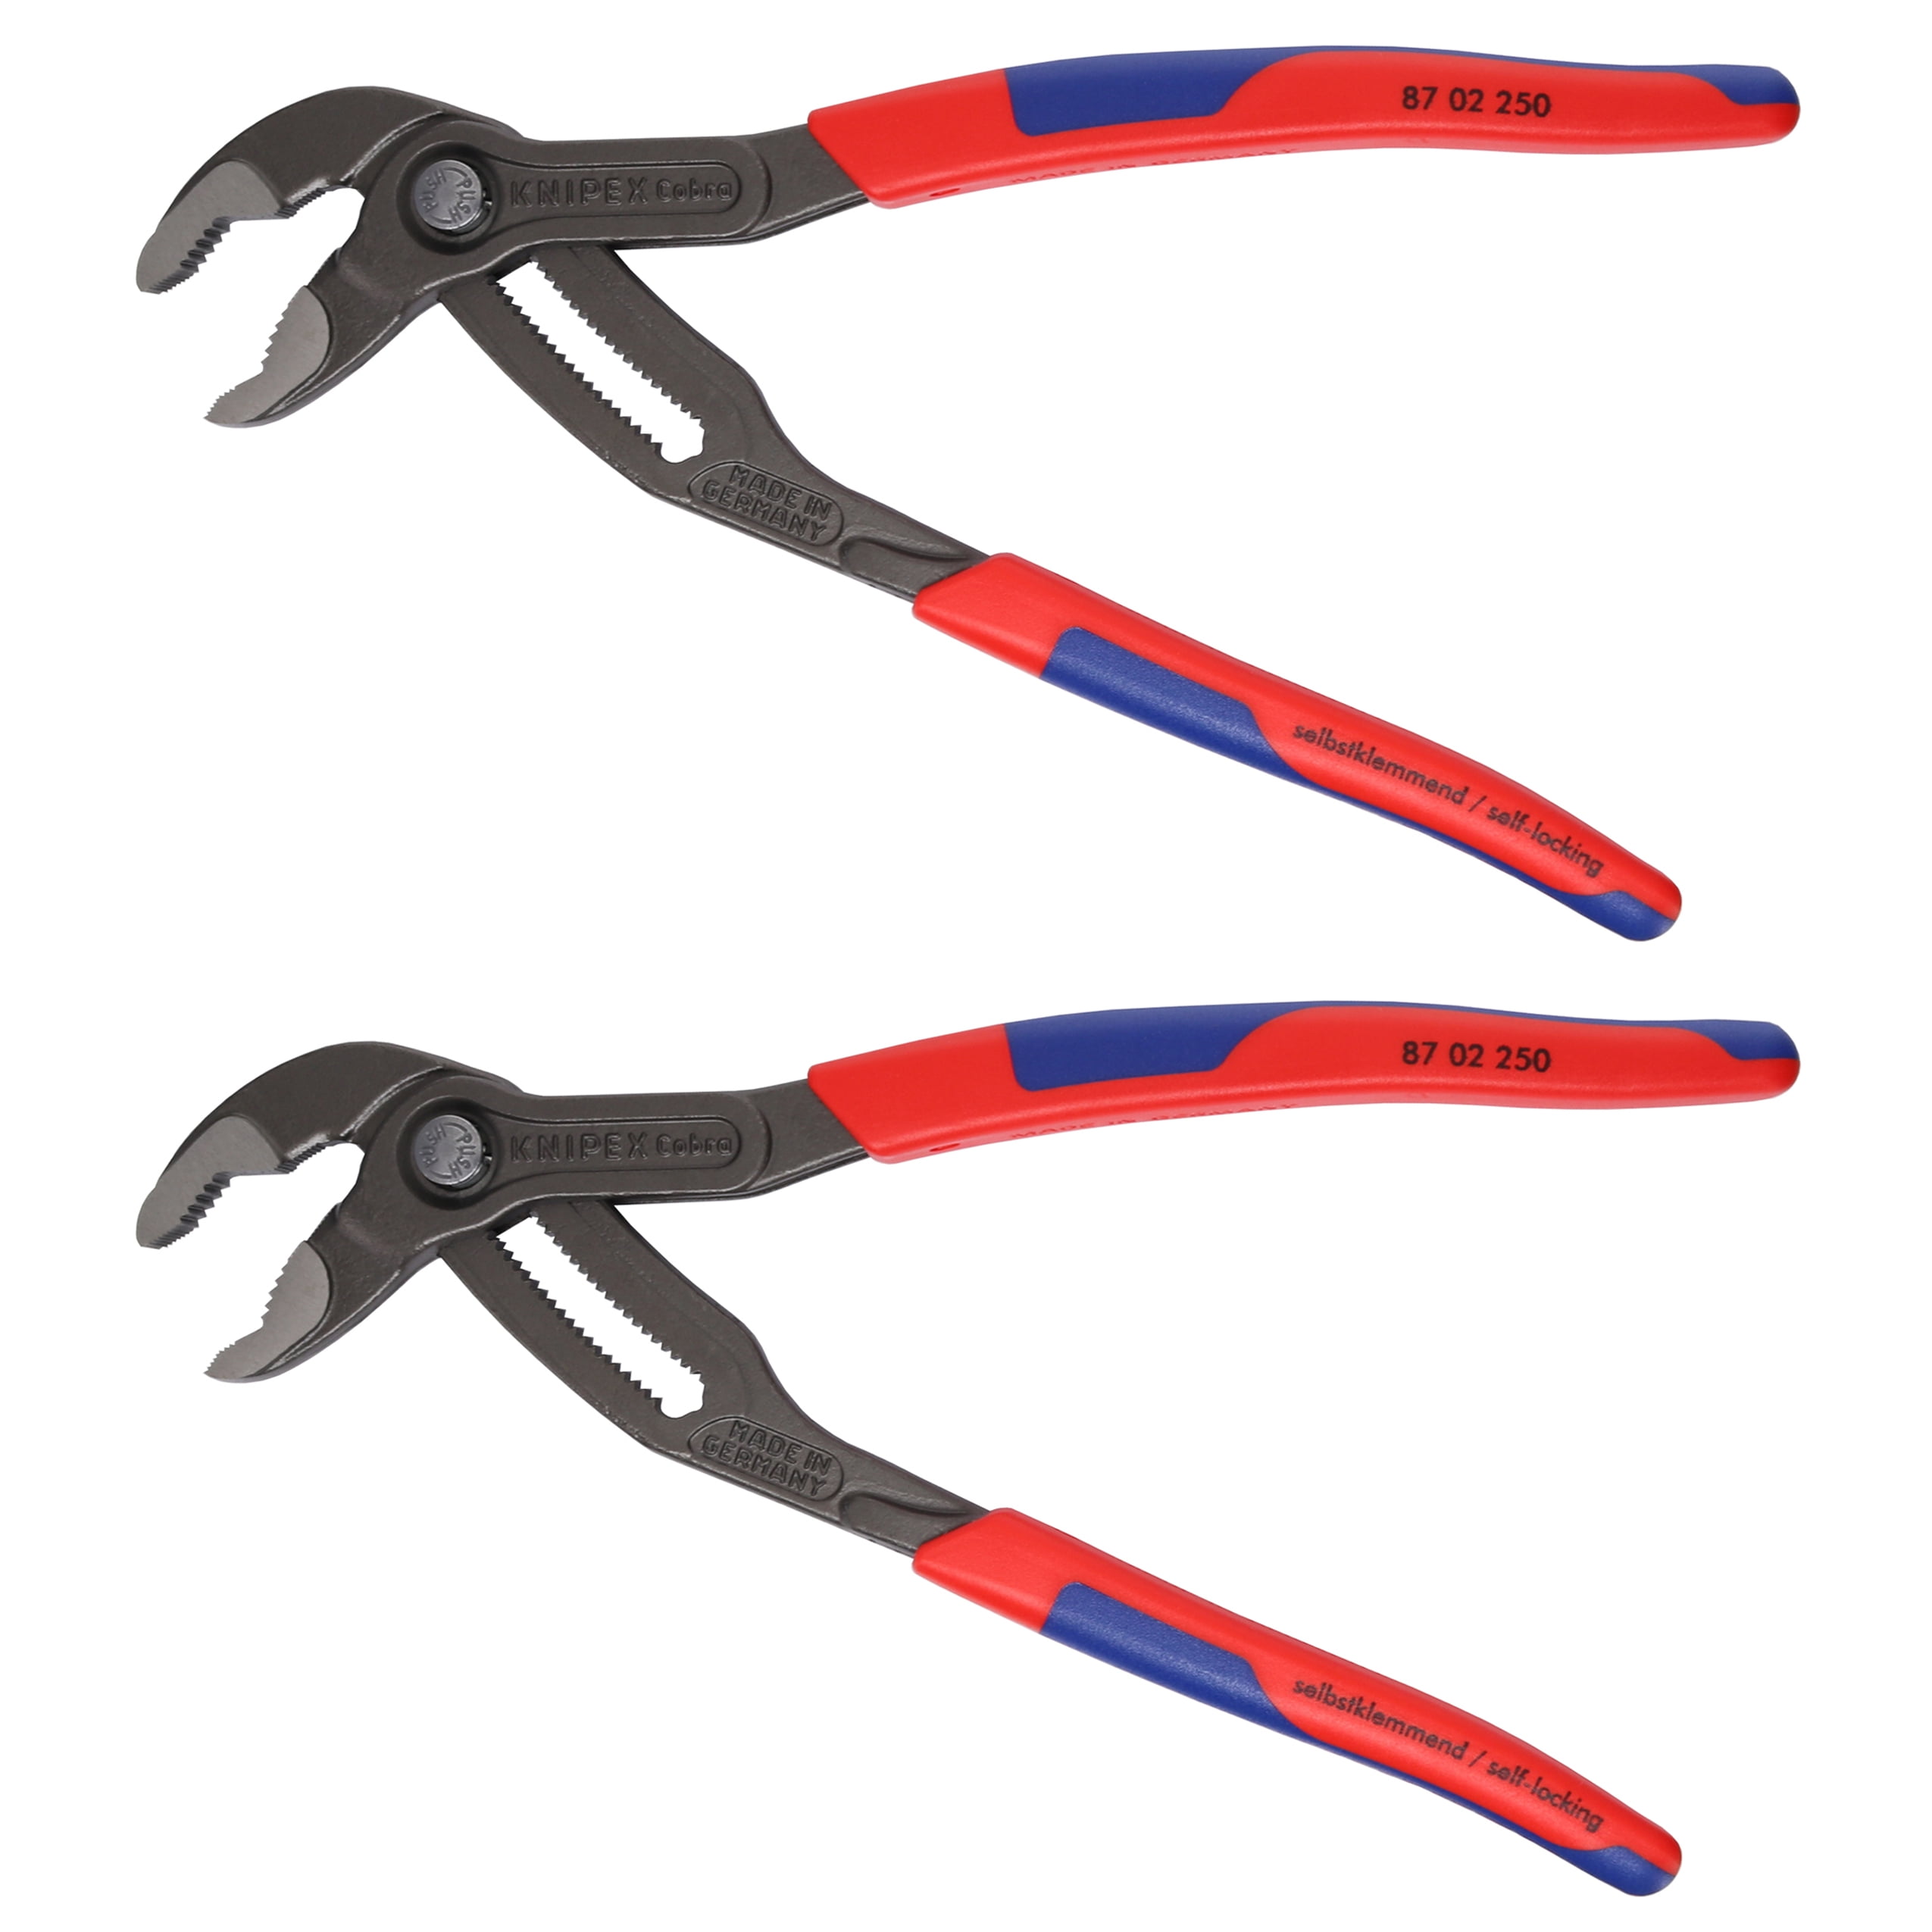 Knipex 87 02 250 10in CobraWater Pump Pliers (2-Pack) 